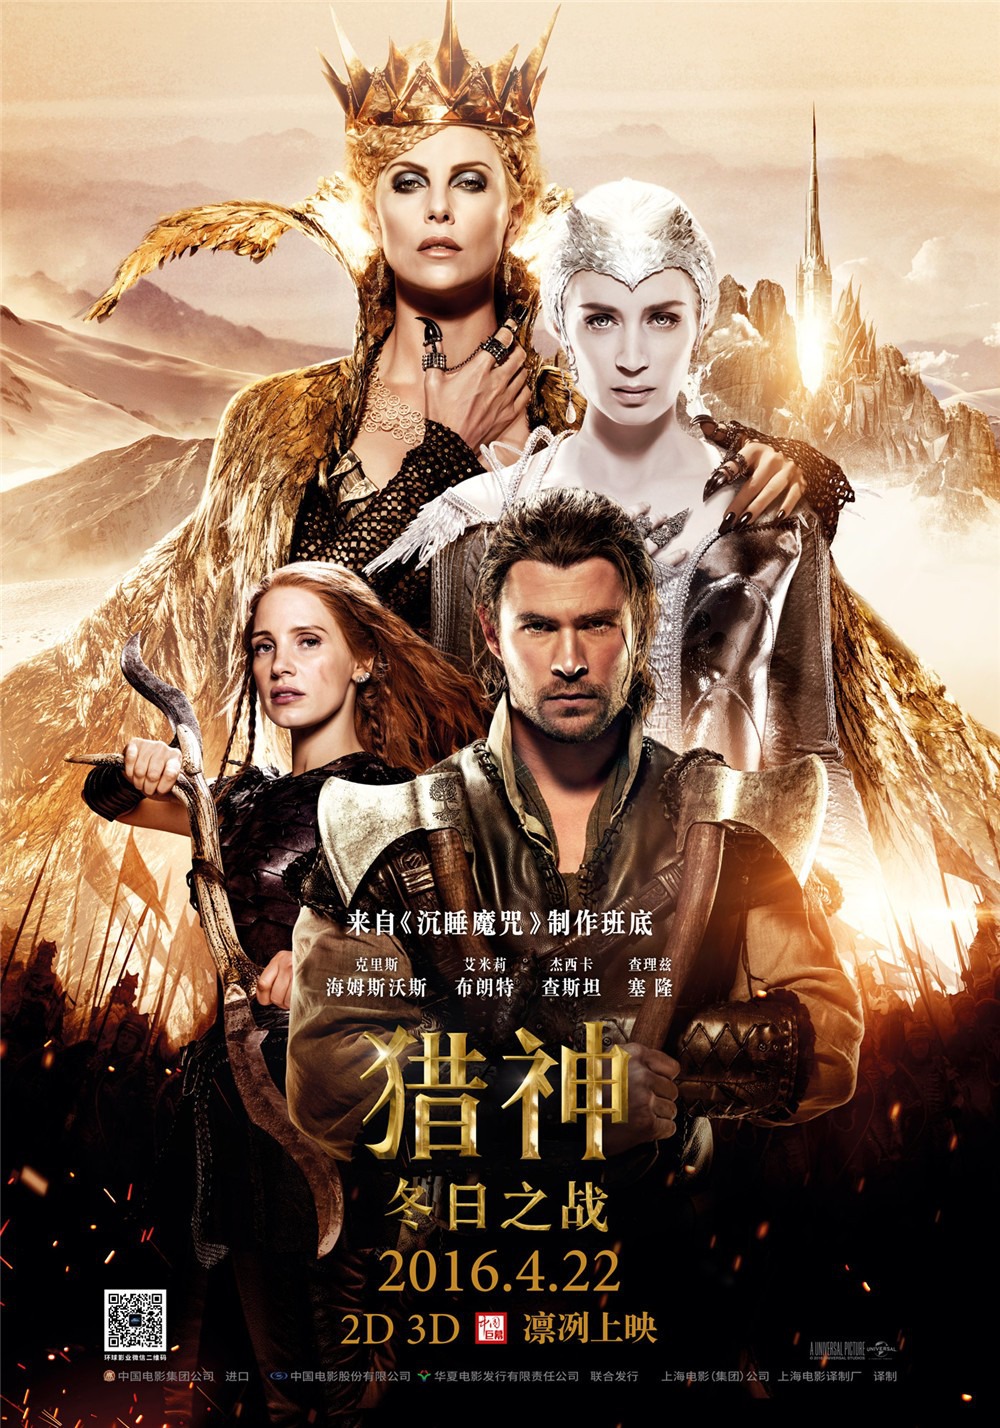 Extra Large Movie Poster Image for The Huntsman (#11 of 15)